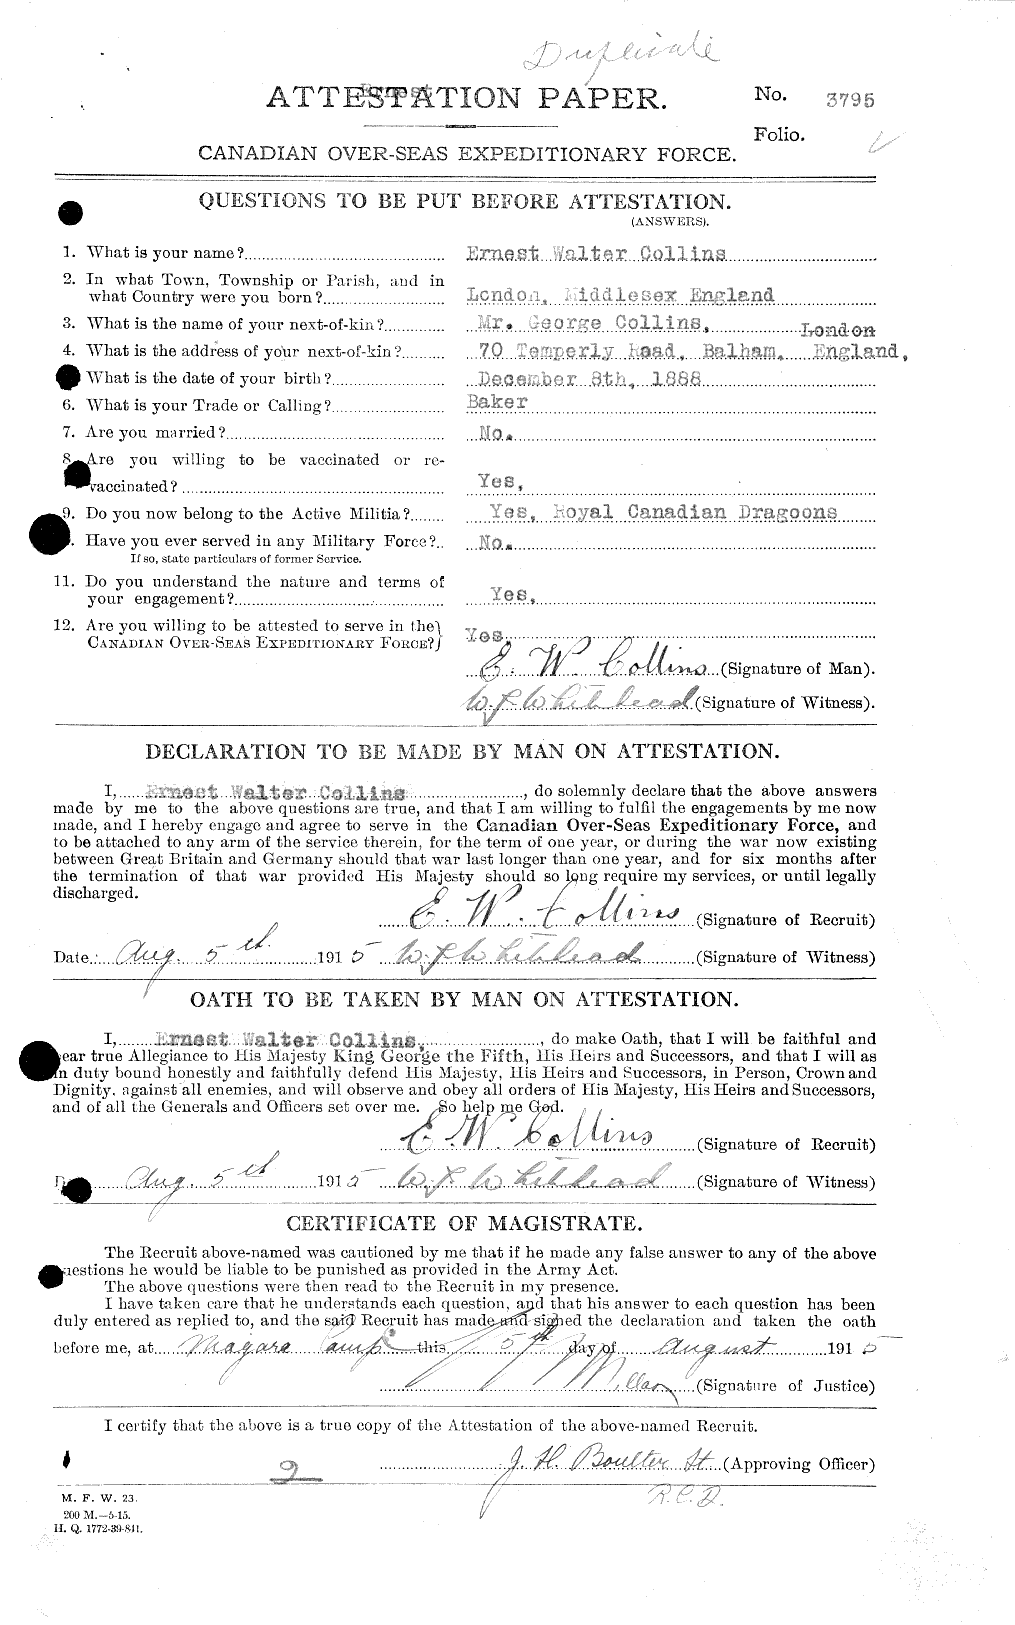 Personnel Records of the First World War - CEF 037776a